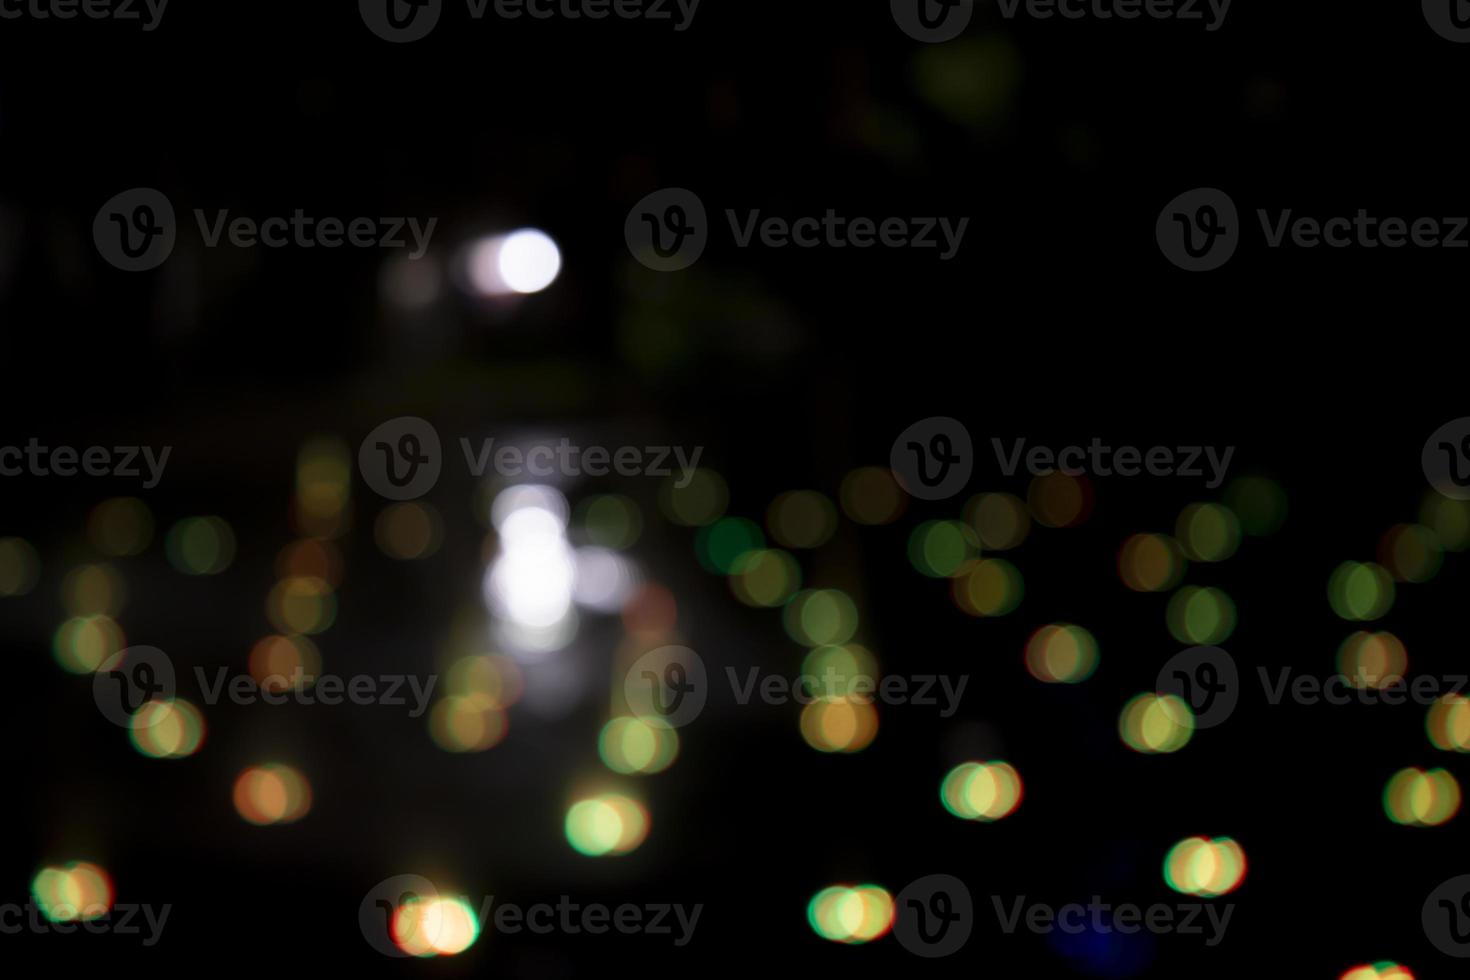 Abstract bokeh light effects on the night. Black background with colorful light effects. background with  Blur bokeh effects. Abstract background texture photo